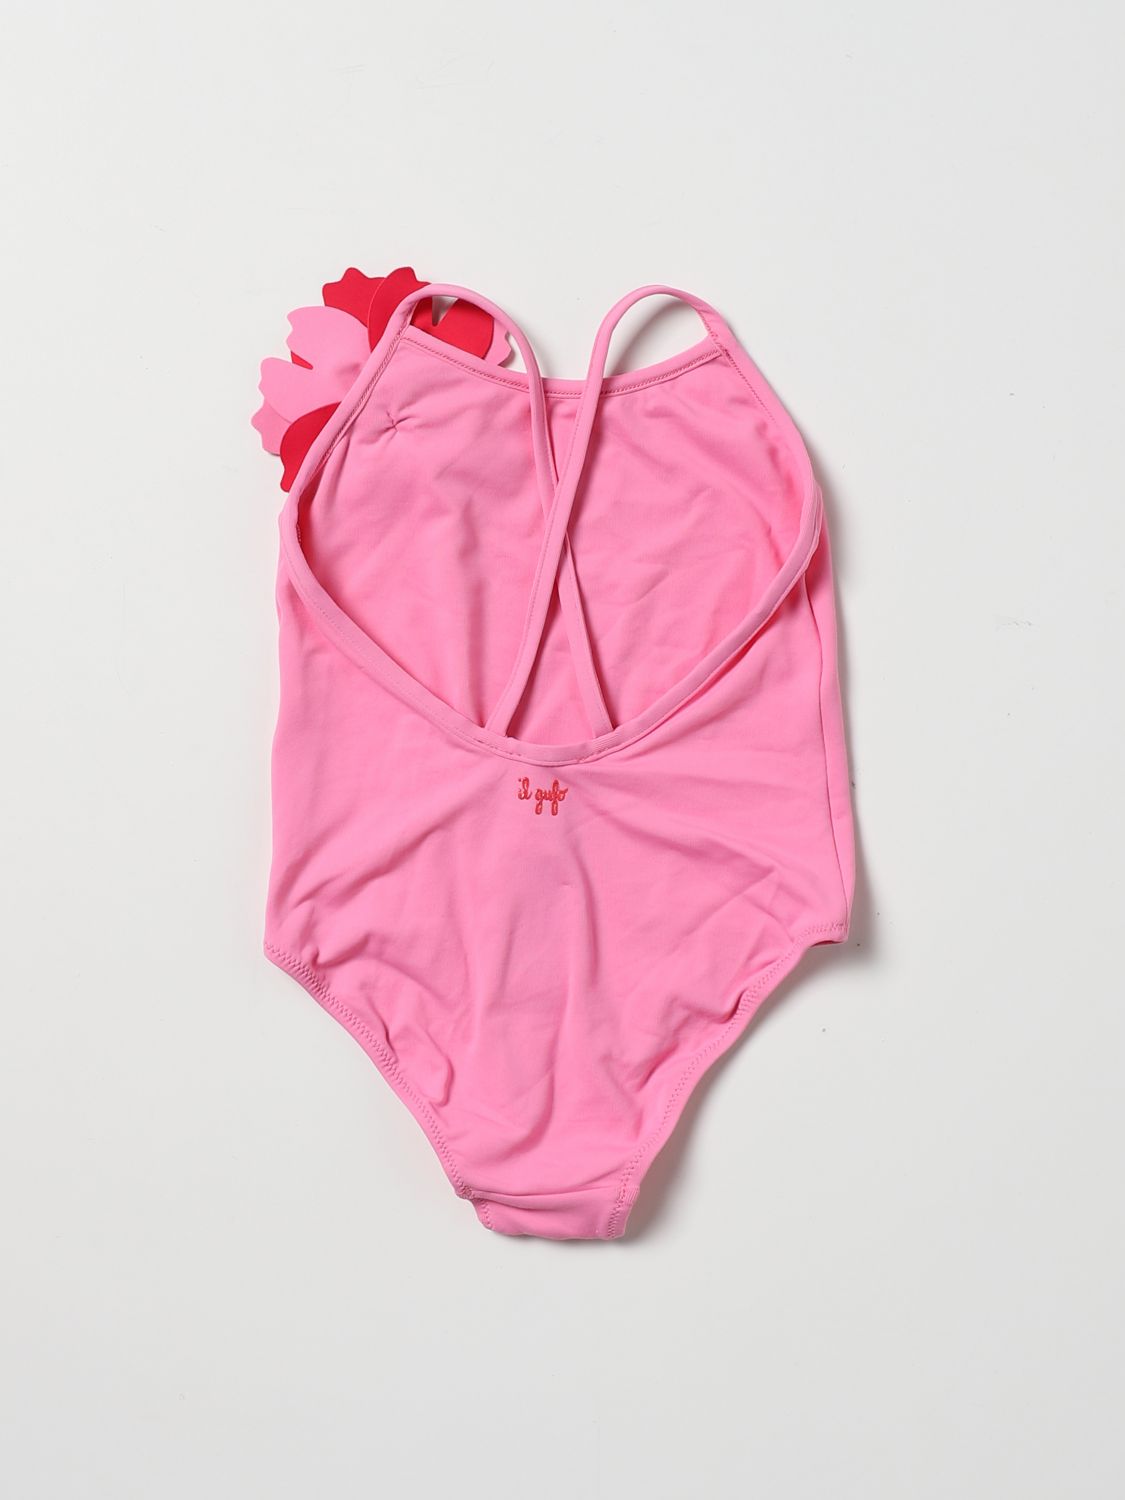 Swimsuit Il Gufo: Il Gufo swimsuit for girls pink 1